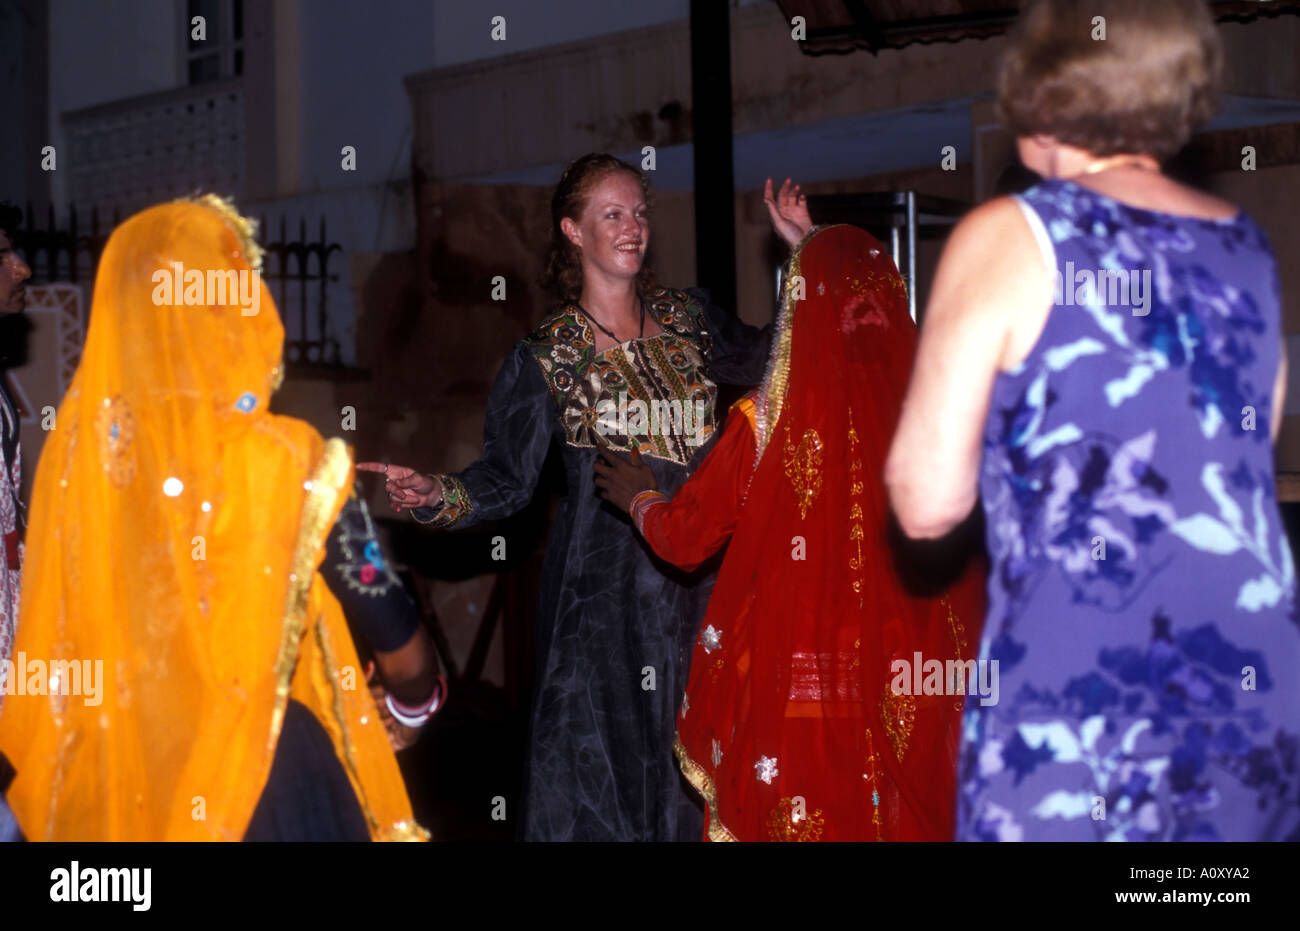 Indian dancing girls performs a traditional dance routine and are joined by western women on the dance floor Stock Photo